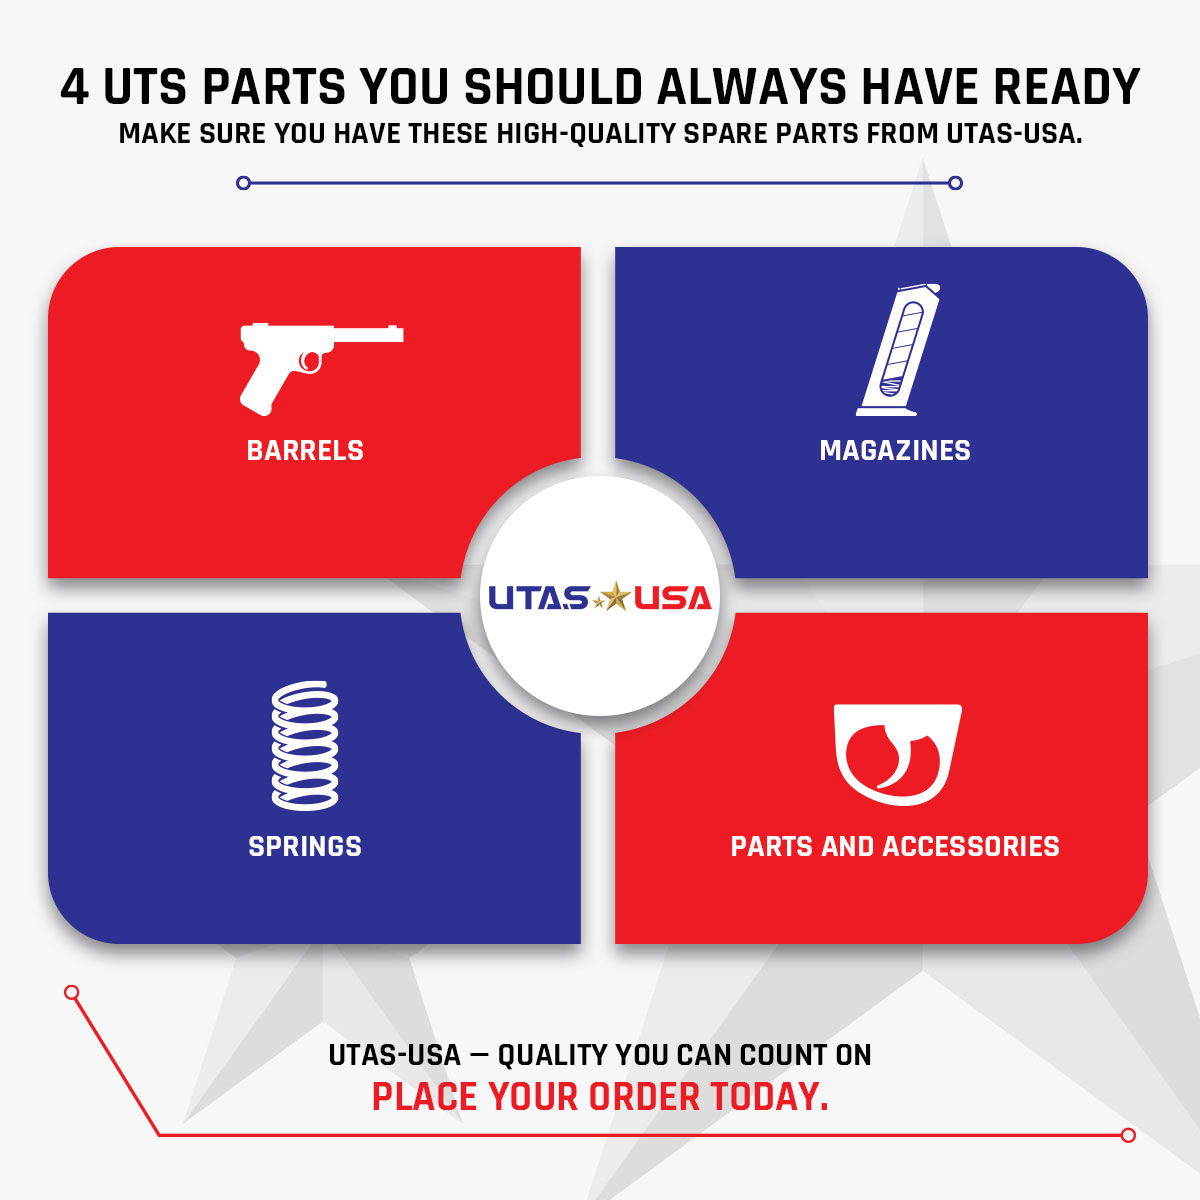 4 UTS Parts You Should Always Have Ready Infographic